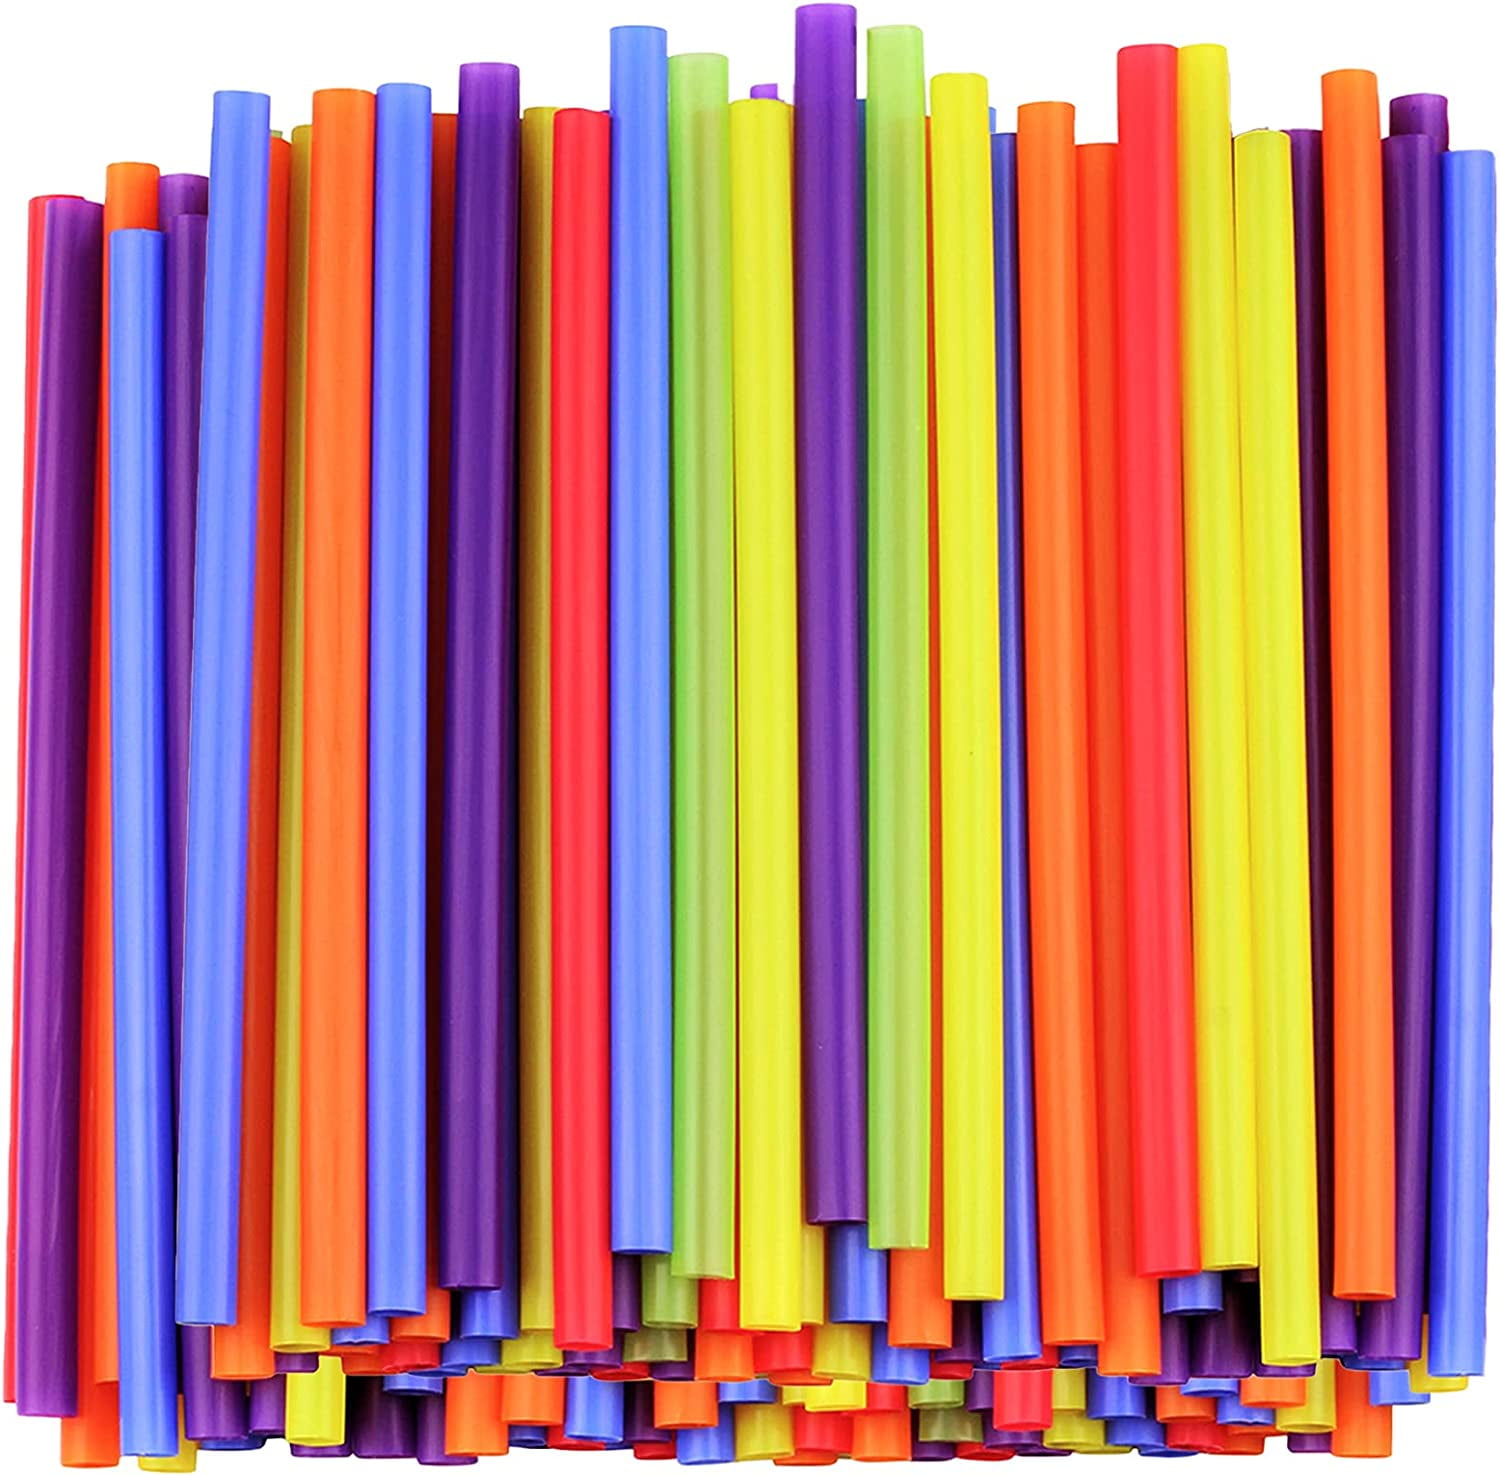 Chef Craft Select Hard Plastic Reusable Straw with Brush, 10.25 inch 8  piece set, Multicolored 